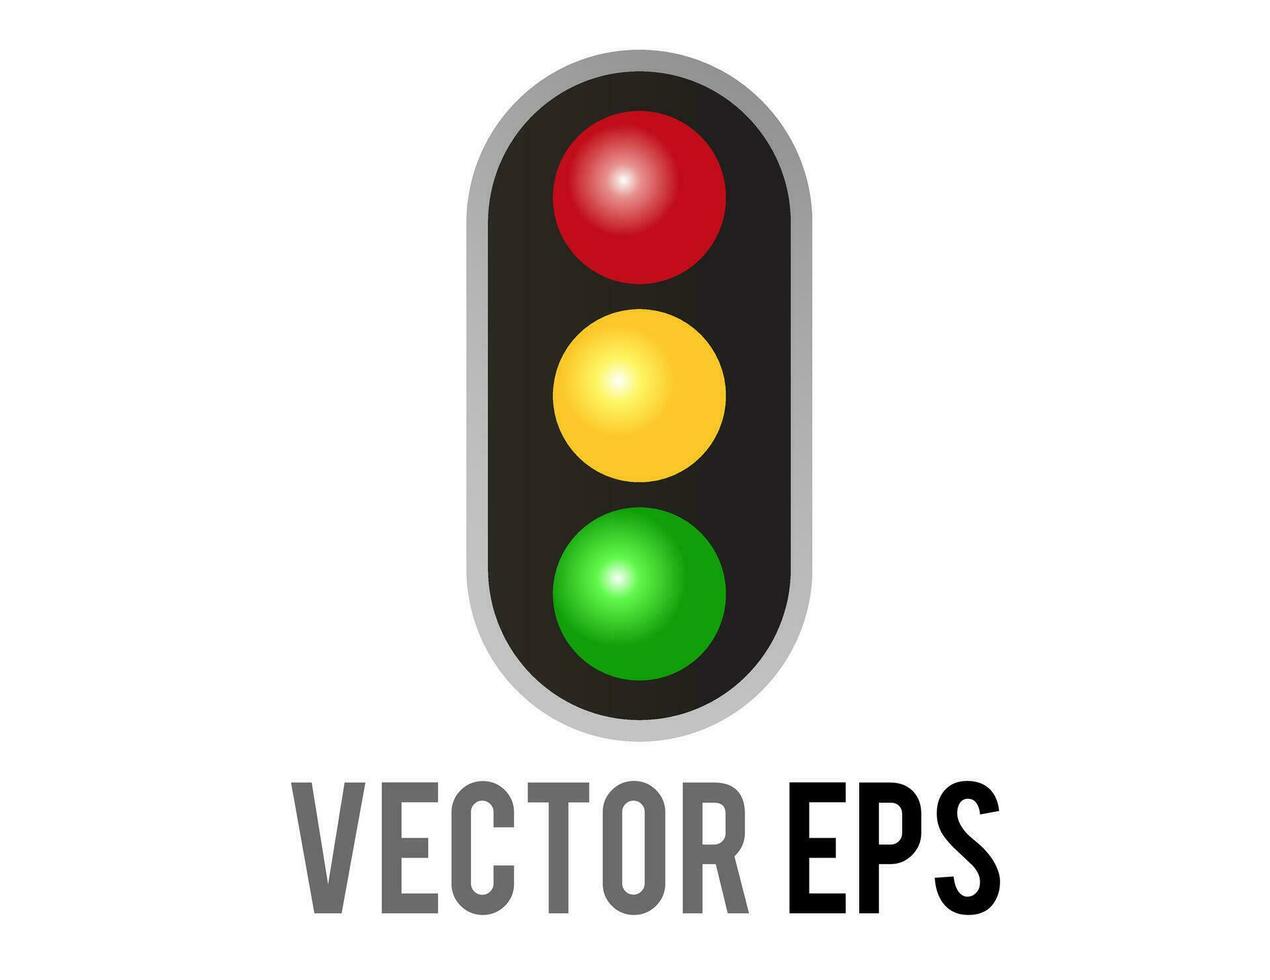 Vector vertical up and down road traffic caution light signal icon